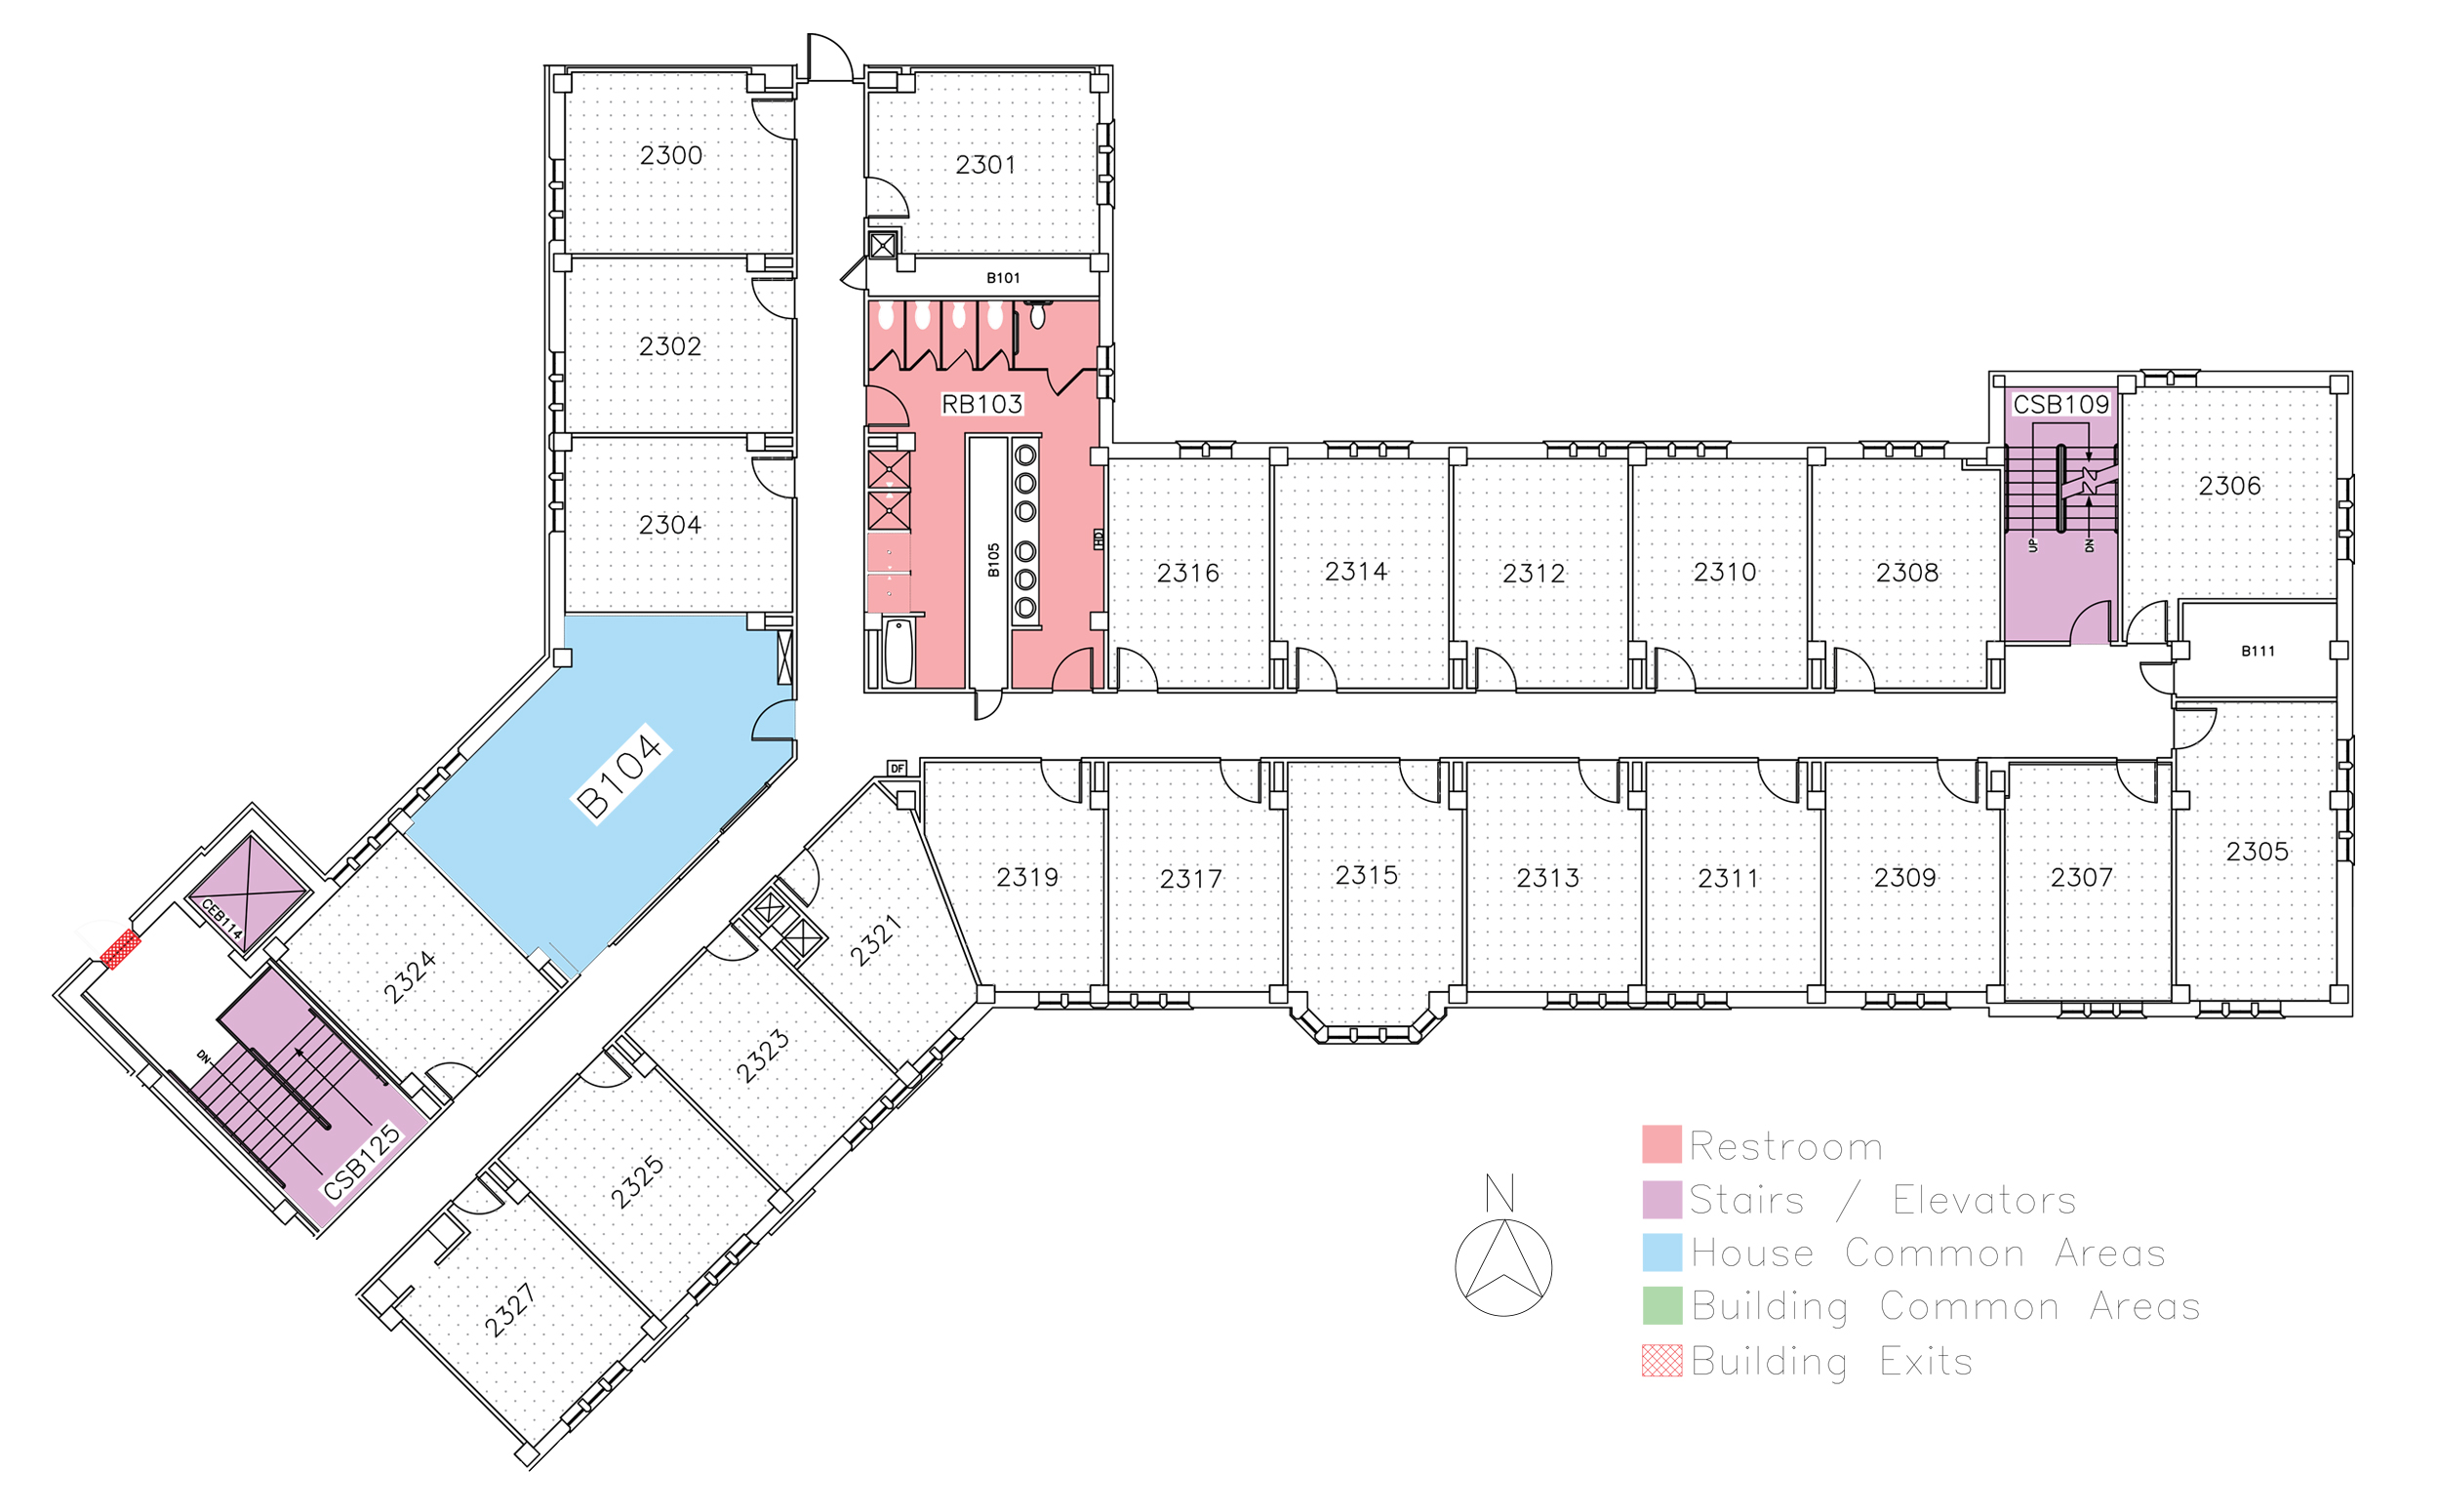 Anthony House, second floor in Friley Hall floor plan. Identifies the location of rooms, bathrooms and common space.